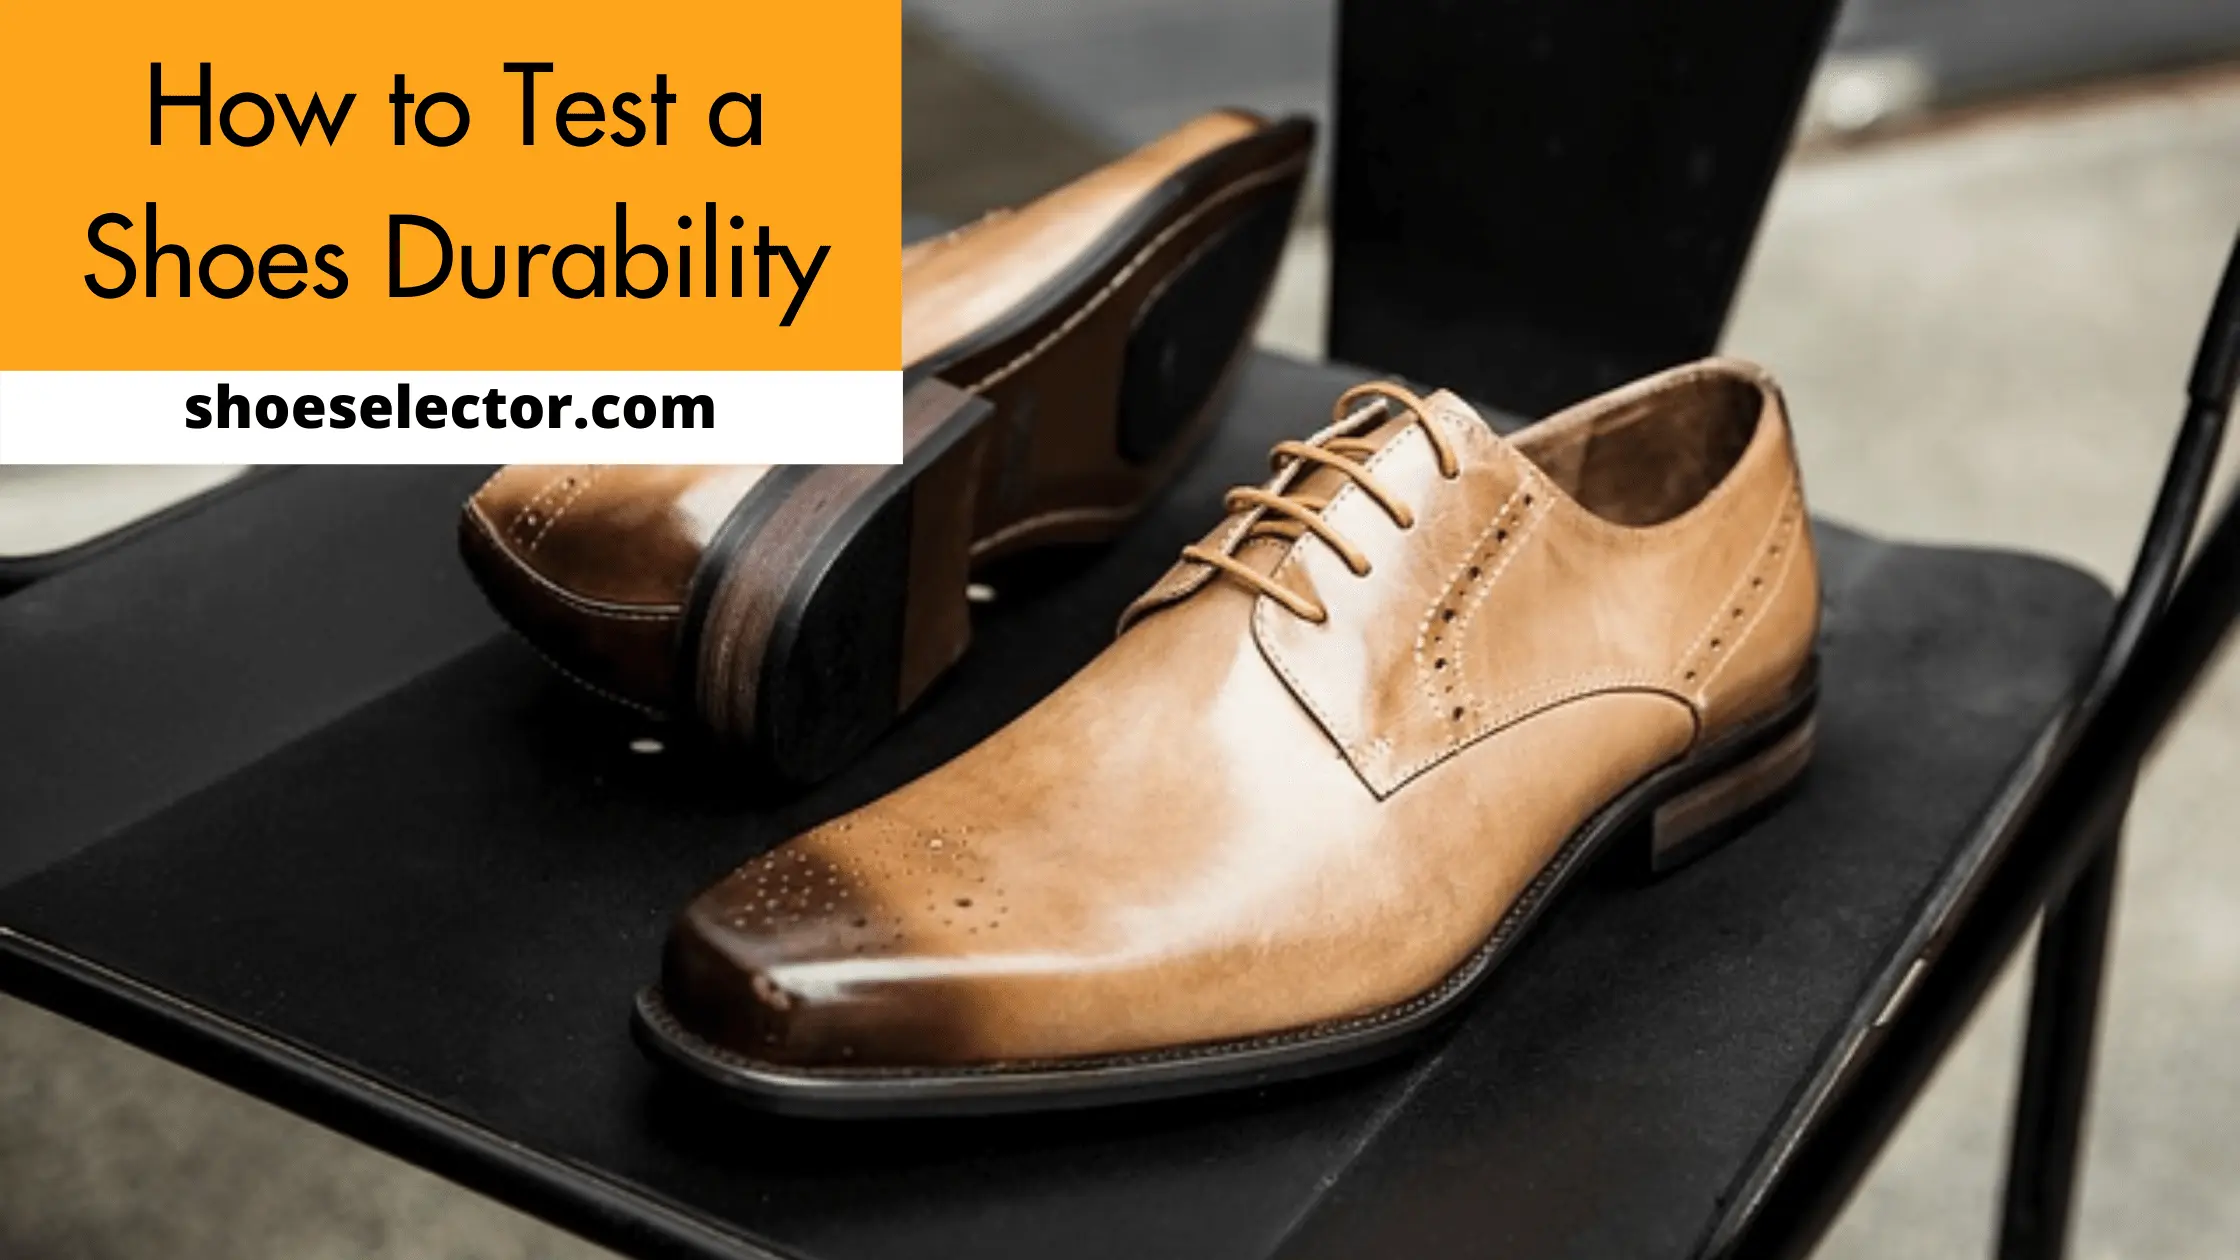 How to Test a Shoes Durability? - Quick Guide